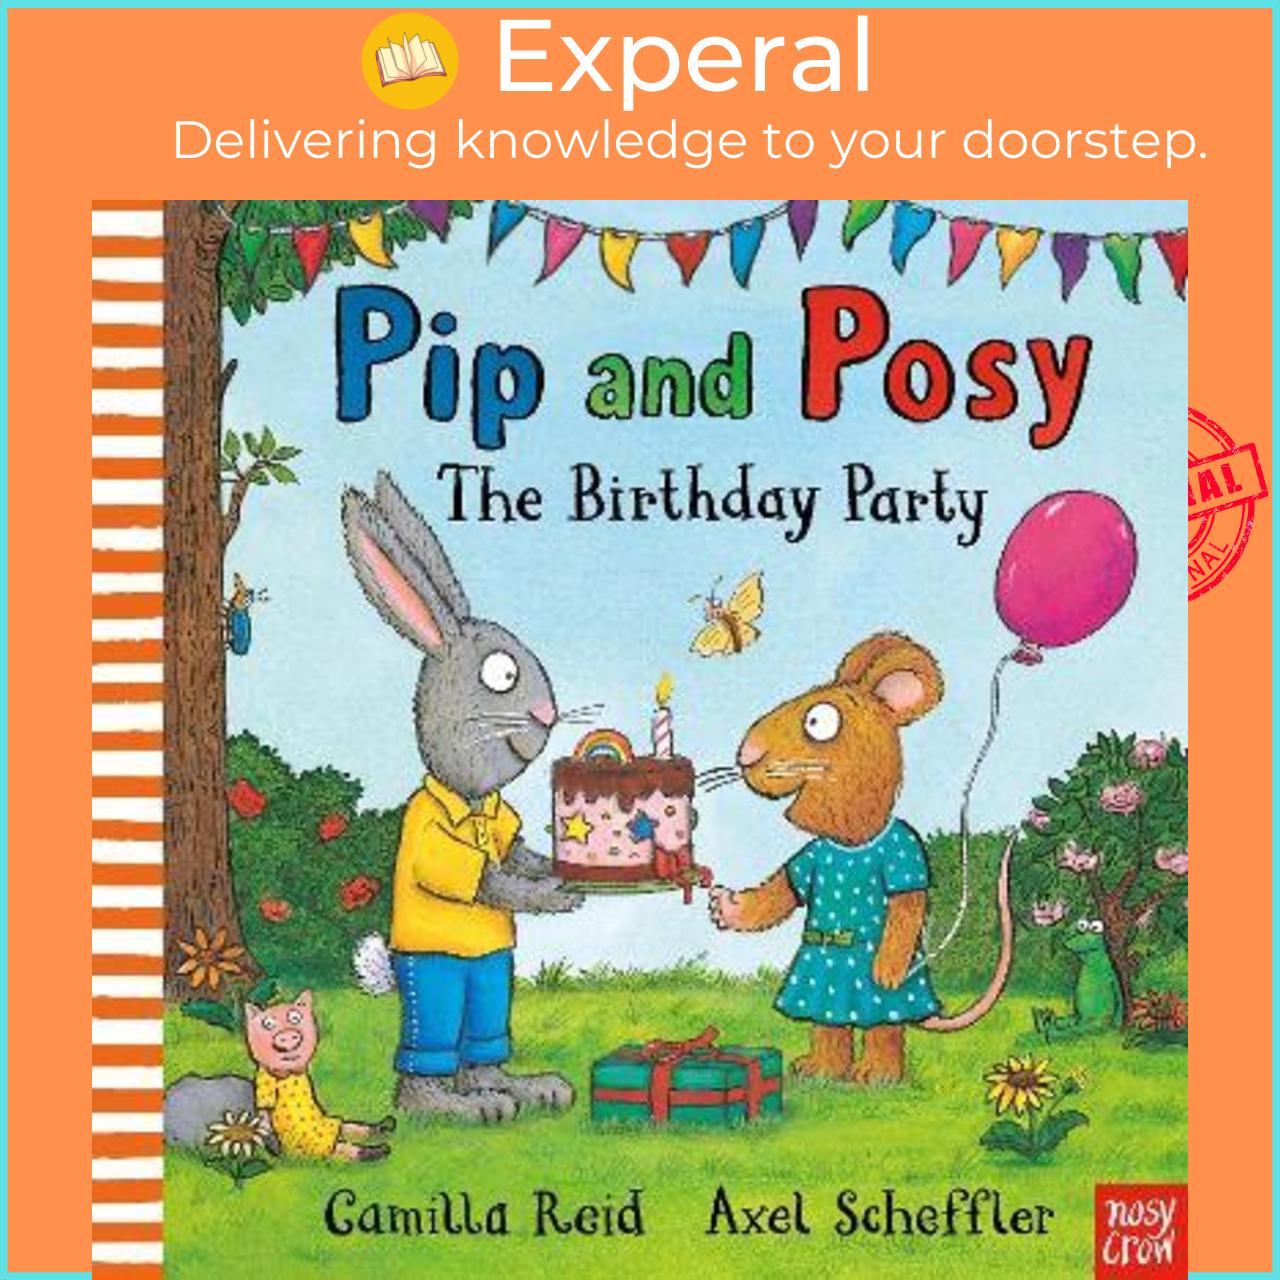 Sách - Pip and Posy: The Birthday Party by Camilla Reid (UK edition, paperback)